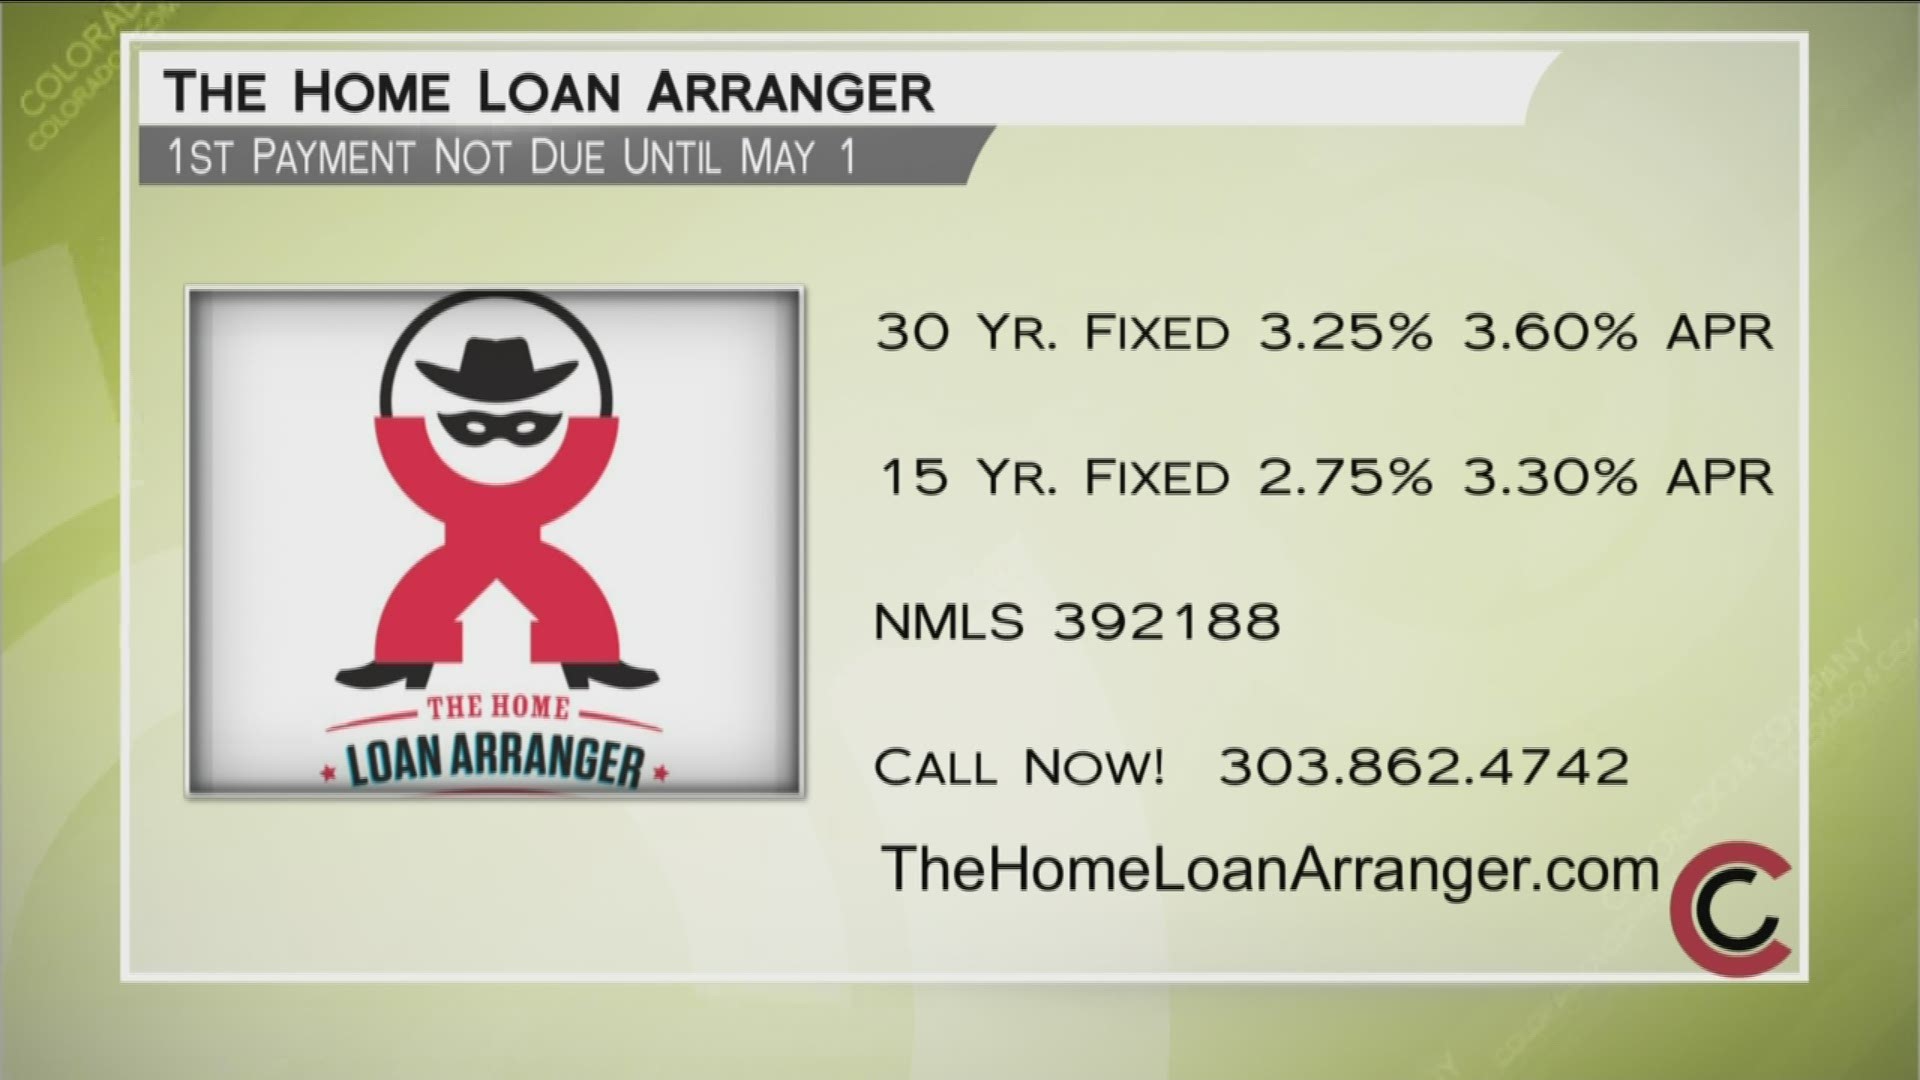 Call the Home Loan Arranger at 303.862.4742 to get started on a new home loan. Your payment won't be due until May! Learn more at TheHomeLoanArranger.com.